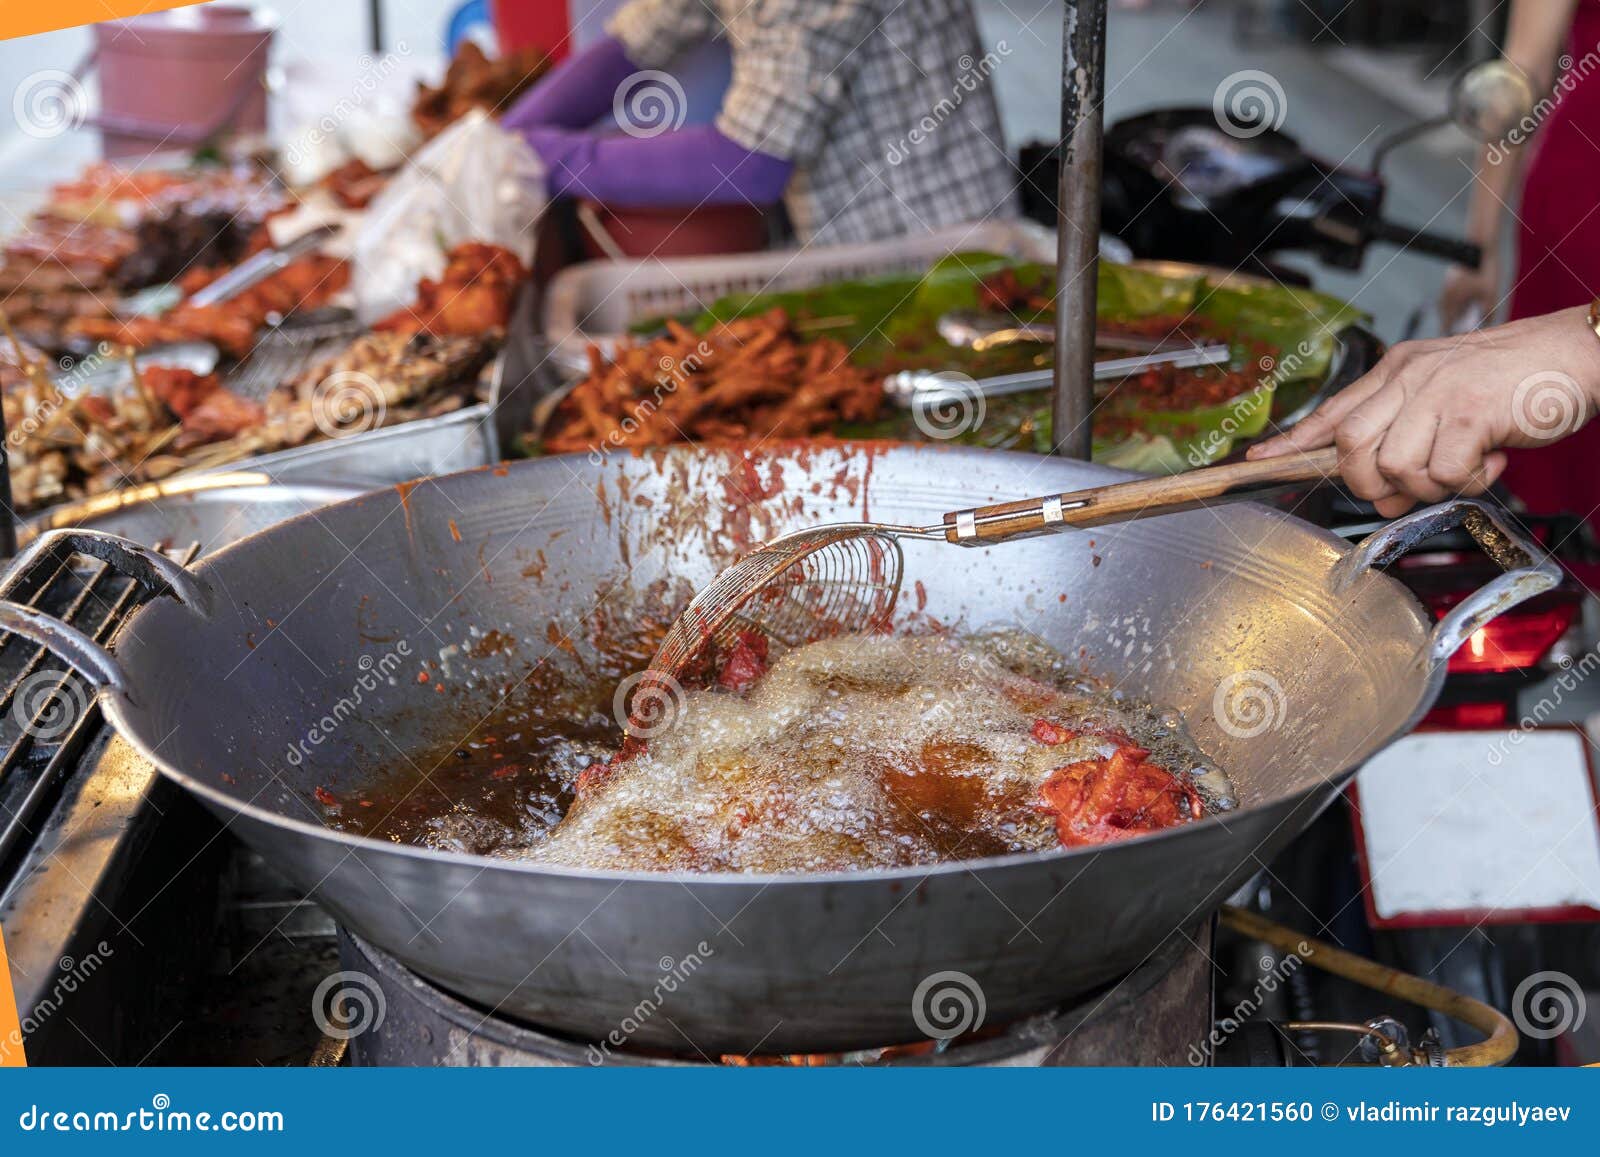 https://thumbs.dreamstime.com/z/street-food-thailand-deep-fried-chicken-using-large-frying-pan-boiling-oil-carts-travel-local-flavor-176421560.jpg